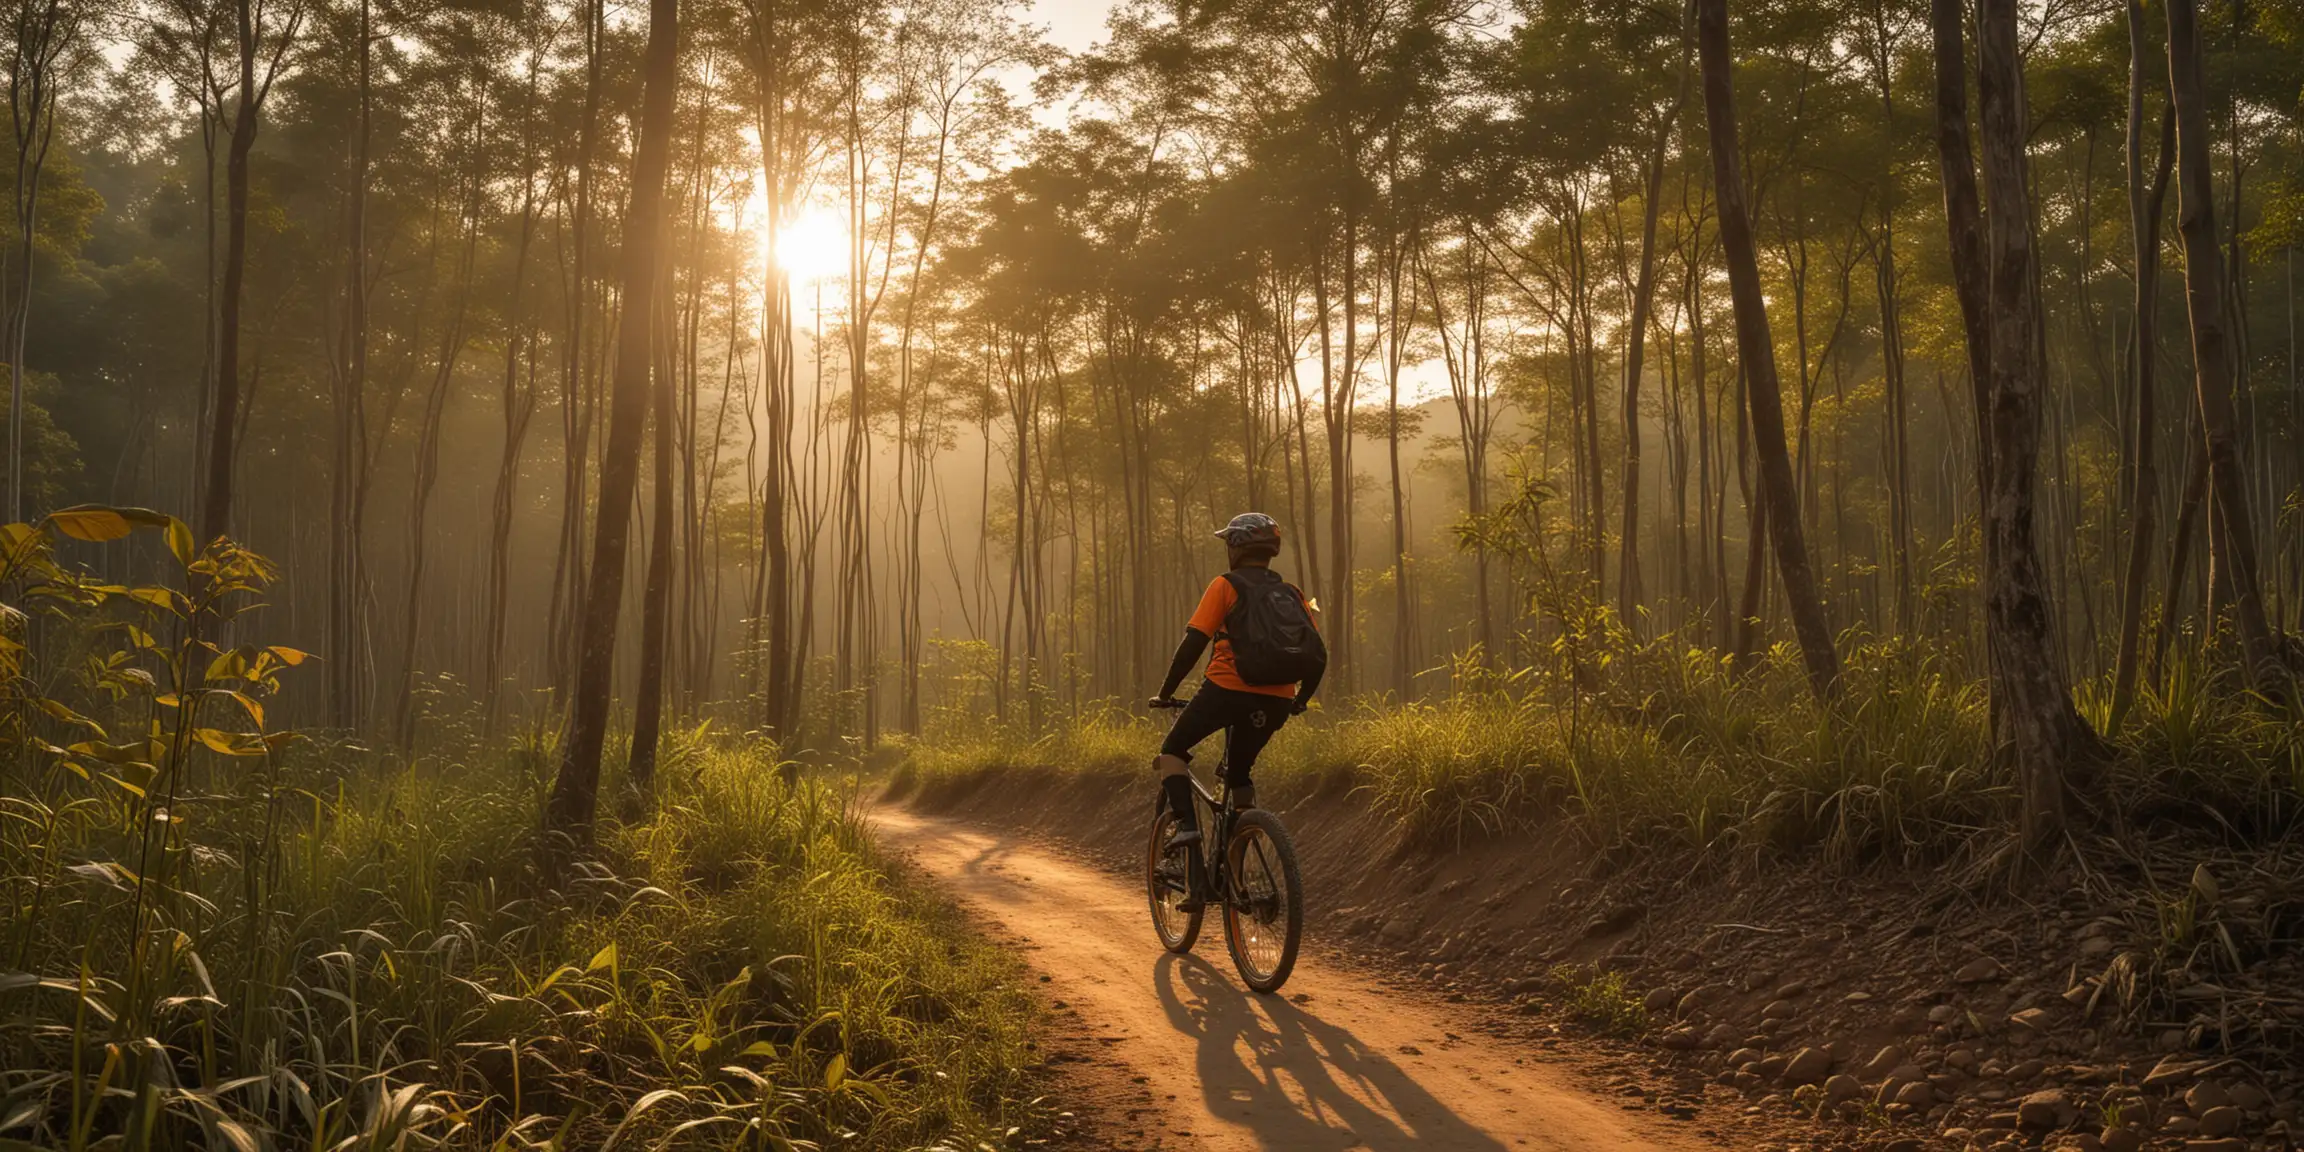 Adventurous Mountain Biking Amidst Northern Thailands Forests and Mountains at Golden Hour